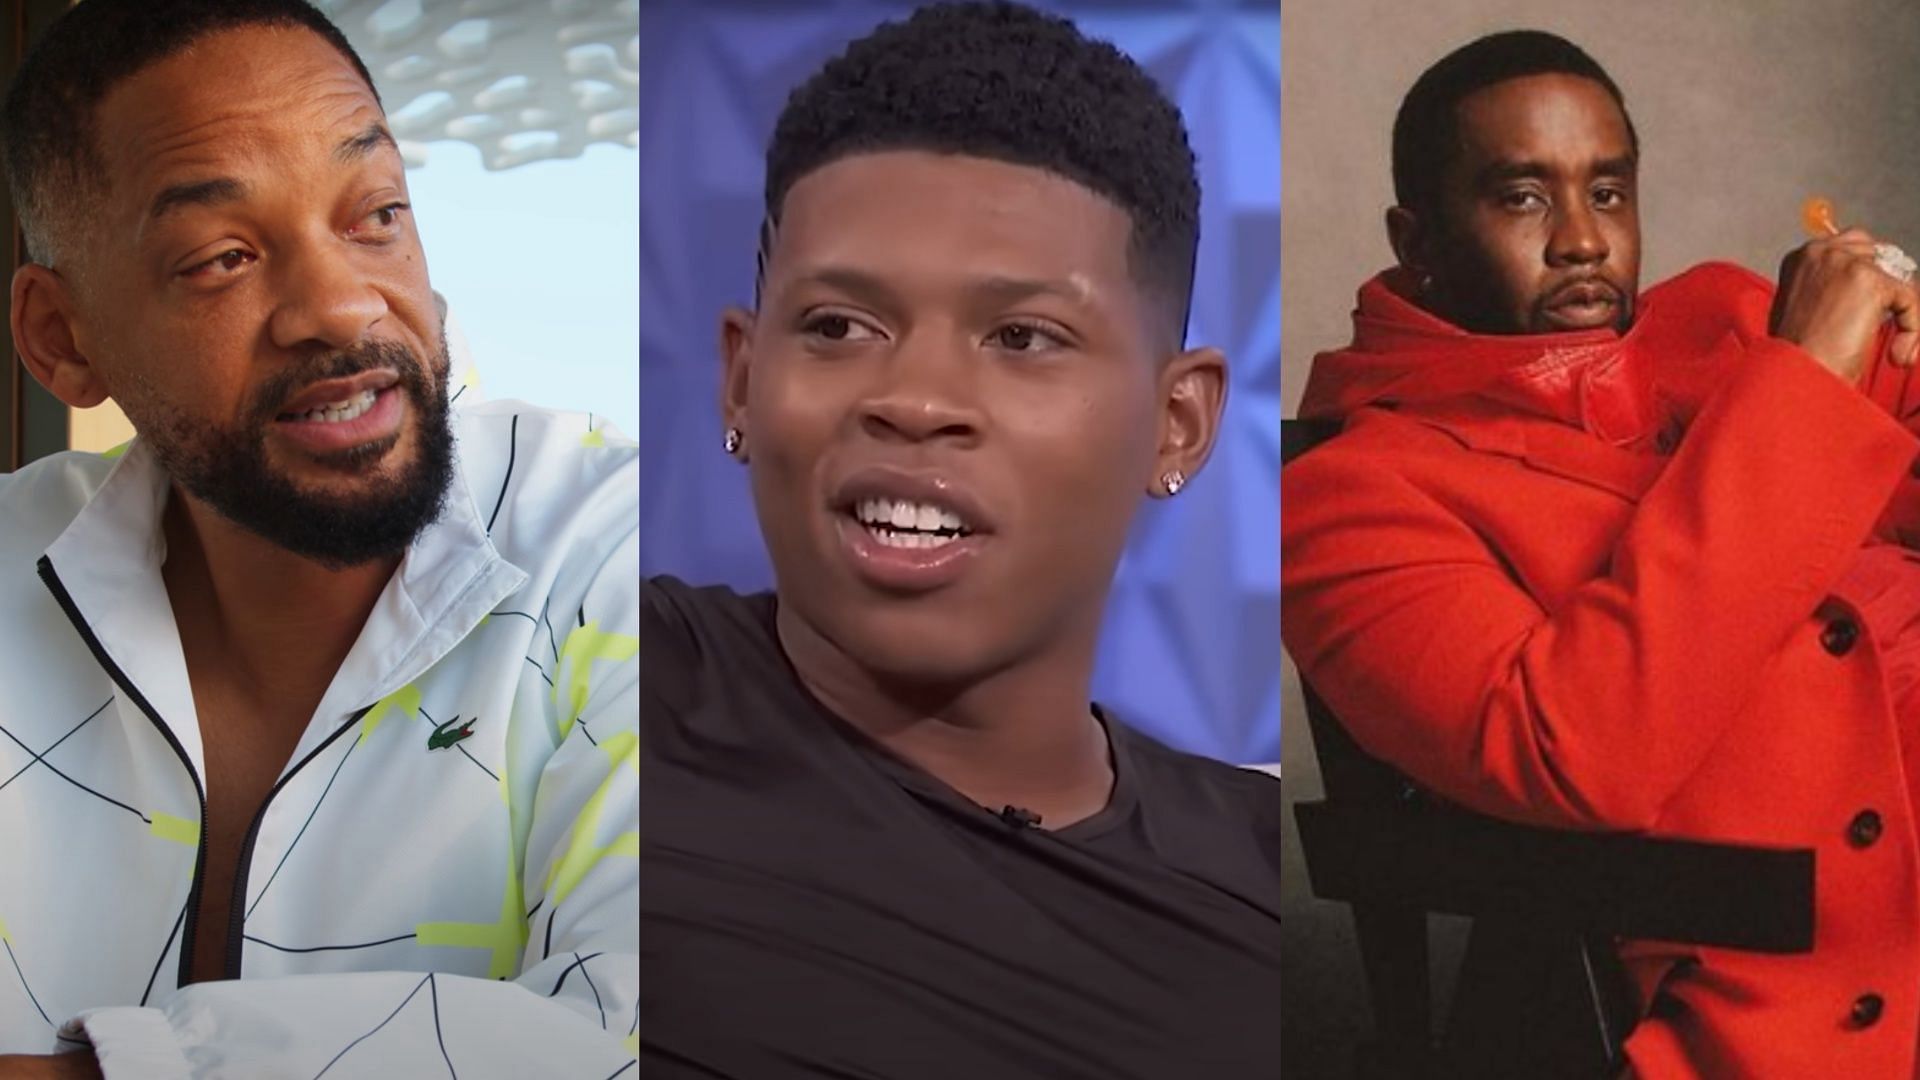 Claims of Bryshere Gray allegedly suing Diddy go viral online (Images via YouTube and diddy/Instagram)